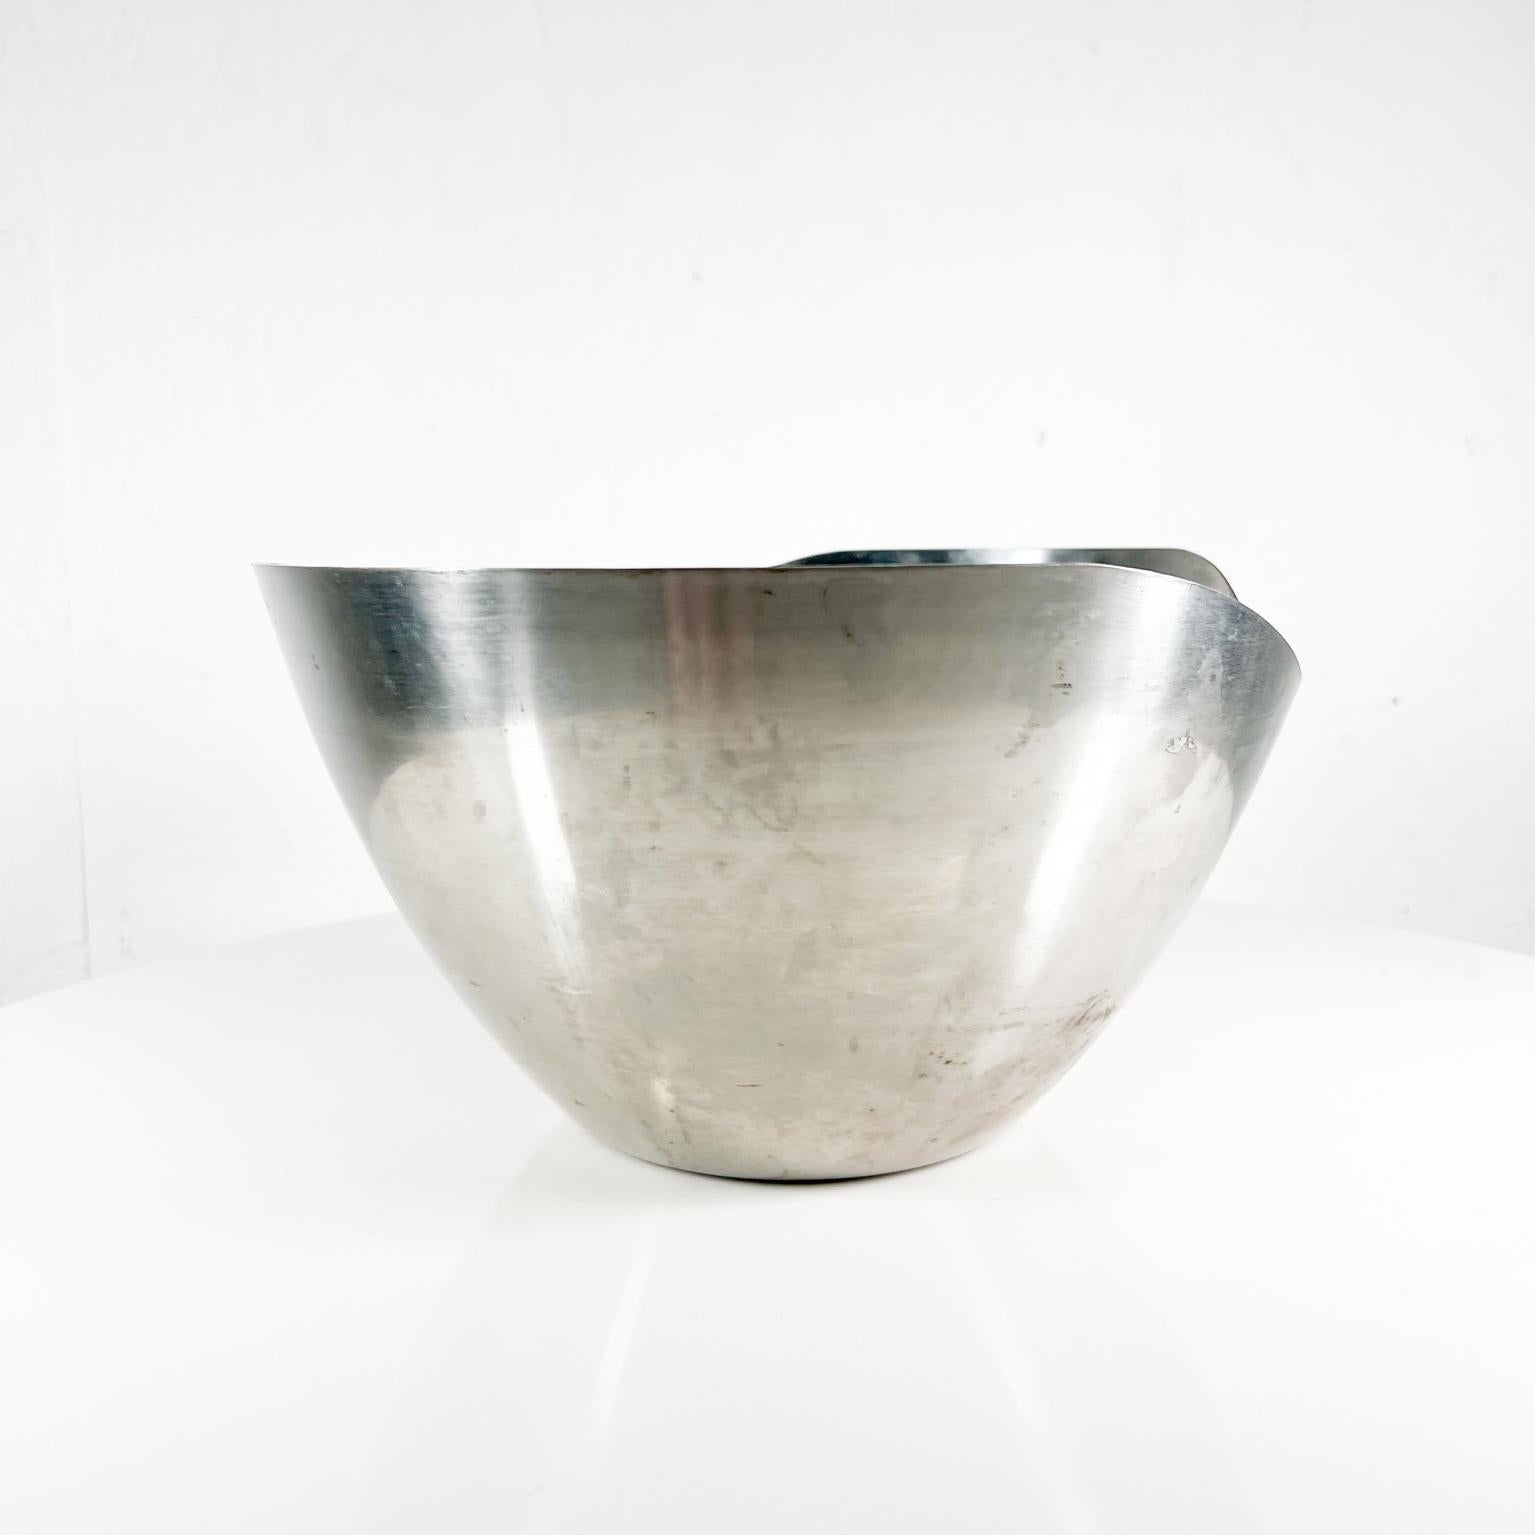 Mid-20th Century 1960s Modern Sculptural Stainless-Steel Wave Salad Bowl from Japan